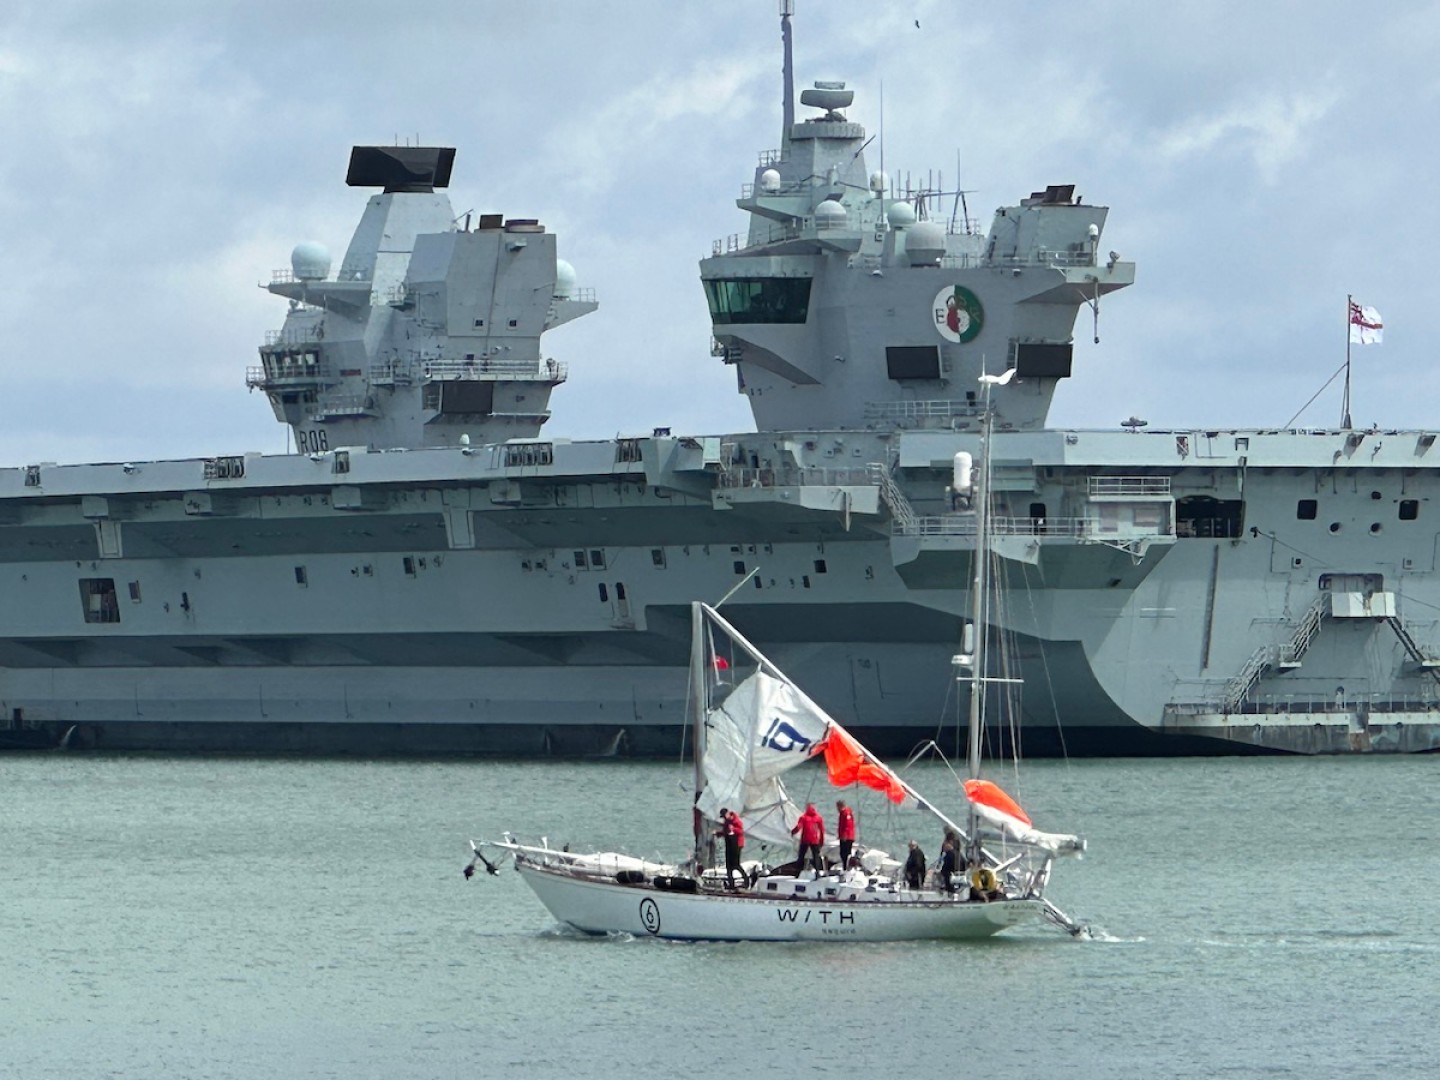 Galiana WithSecure FI (06) passing HMS Queen Elizabeth after dismasting in the Fastnet Race. Down but not out. Photo Credit: Rob Havill / OGR2023